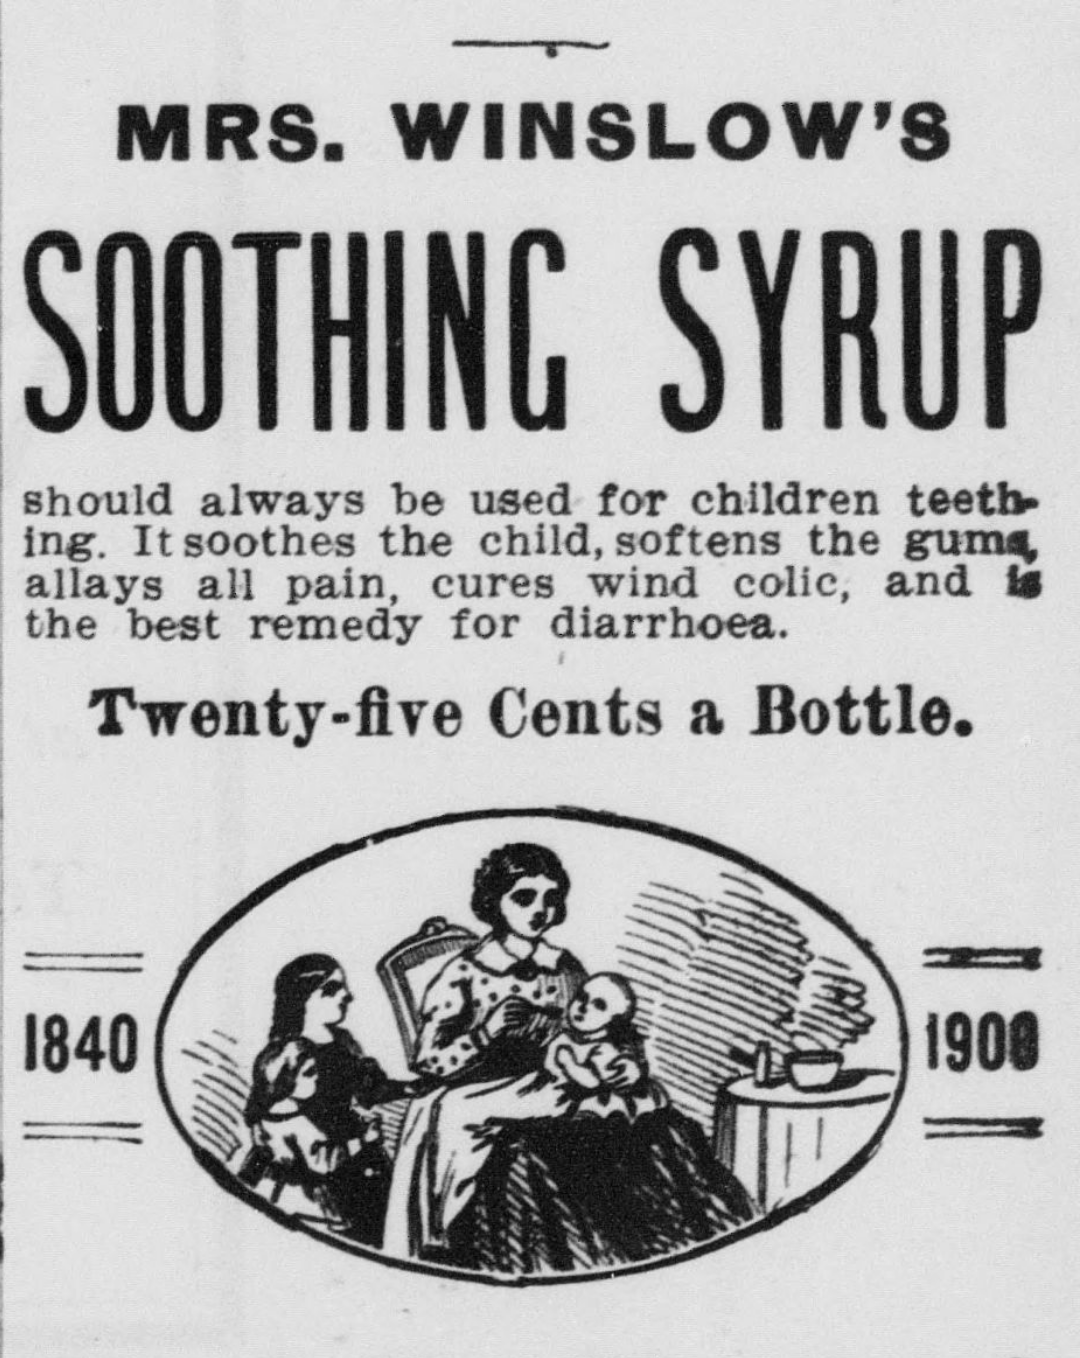 Image depicts a woman in a chair holding an infant she is giving the medicine to, a child is by her side. Text surrounding the image reads, “Mrs. Winslow’s Soothing Syrup should always be used for children teething. It soothes the child, softens the gums, allays all pain, cures wind colic, and is the best remedy for diarrhoea. Twenty-five cents a bottle.” On either side of the image, it lists the years 1840 and 1908.